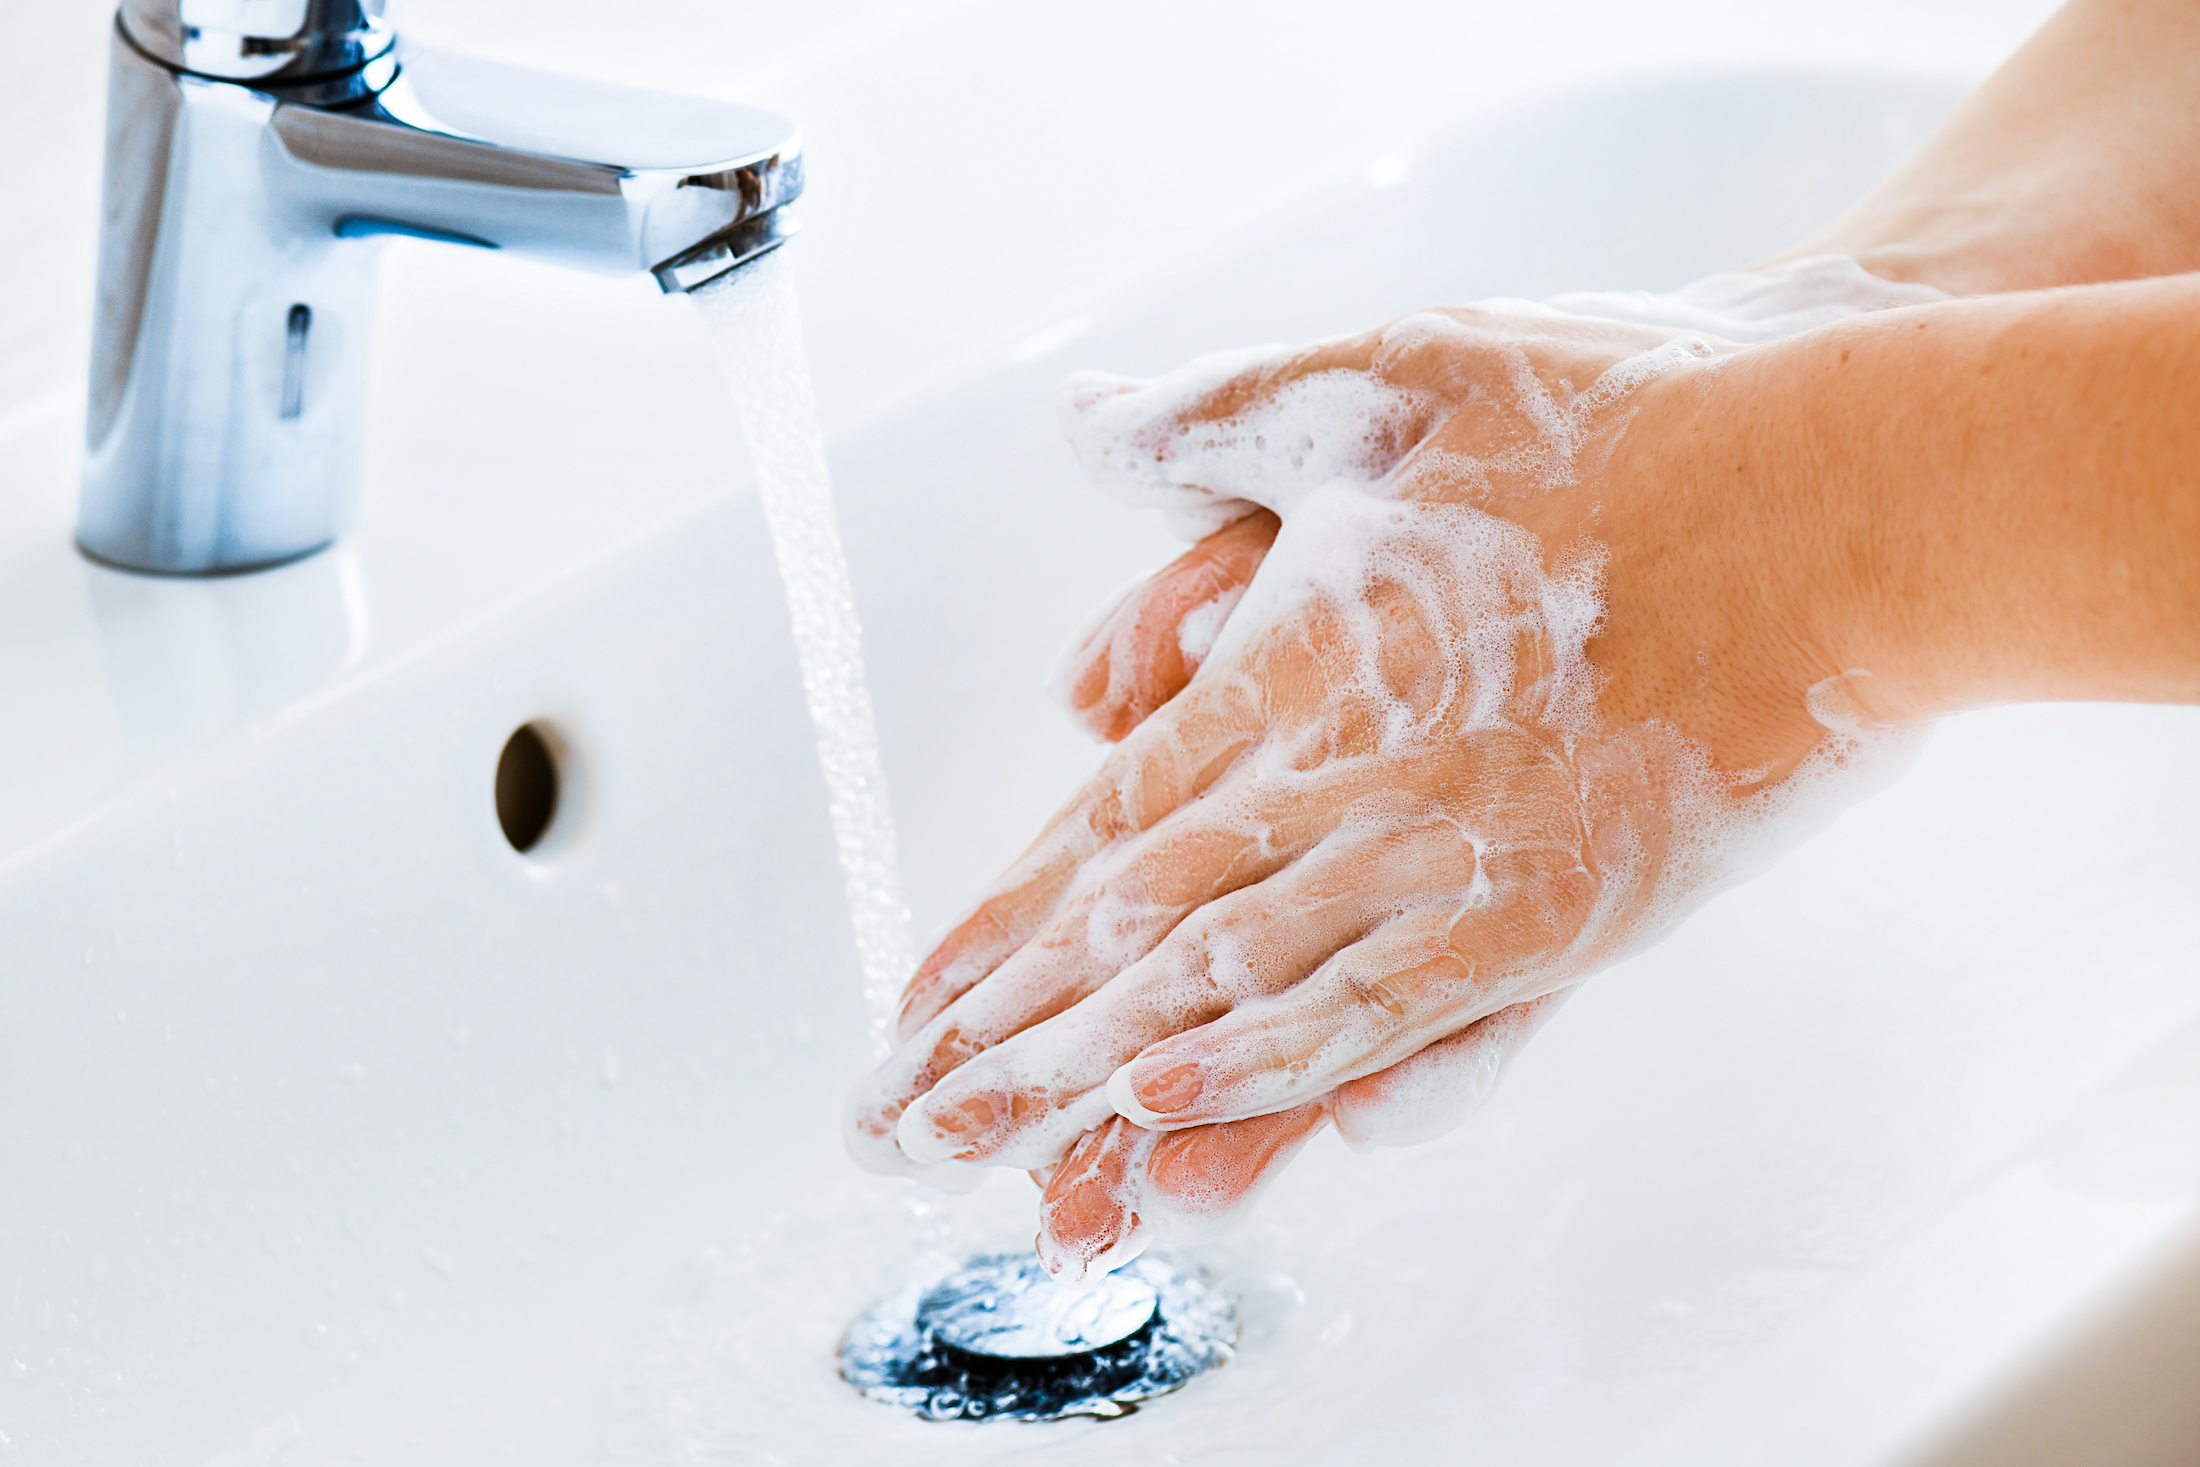 Woman use soap and washing hands